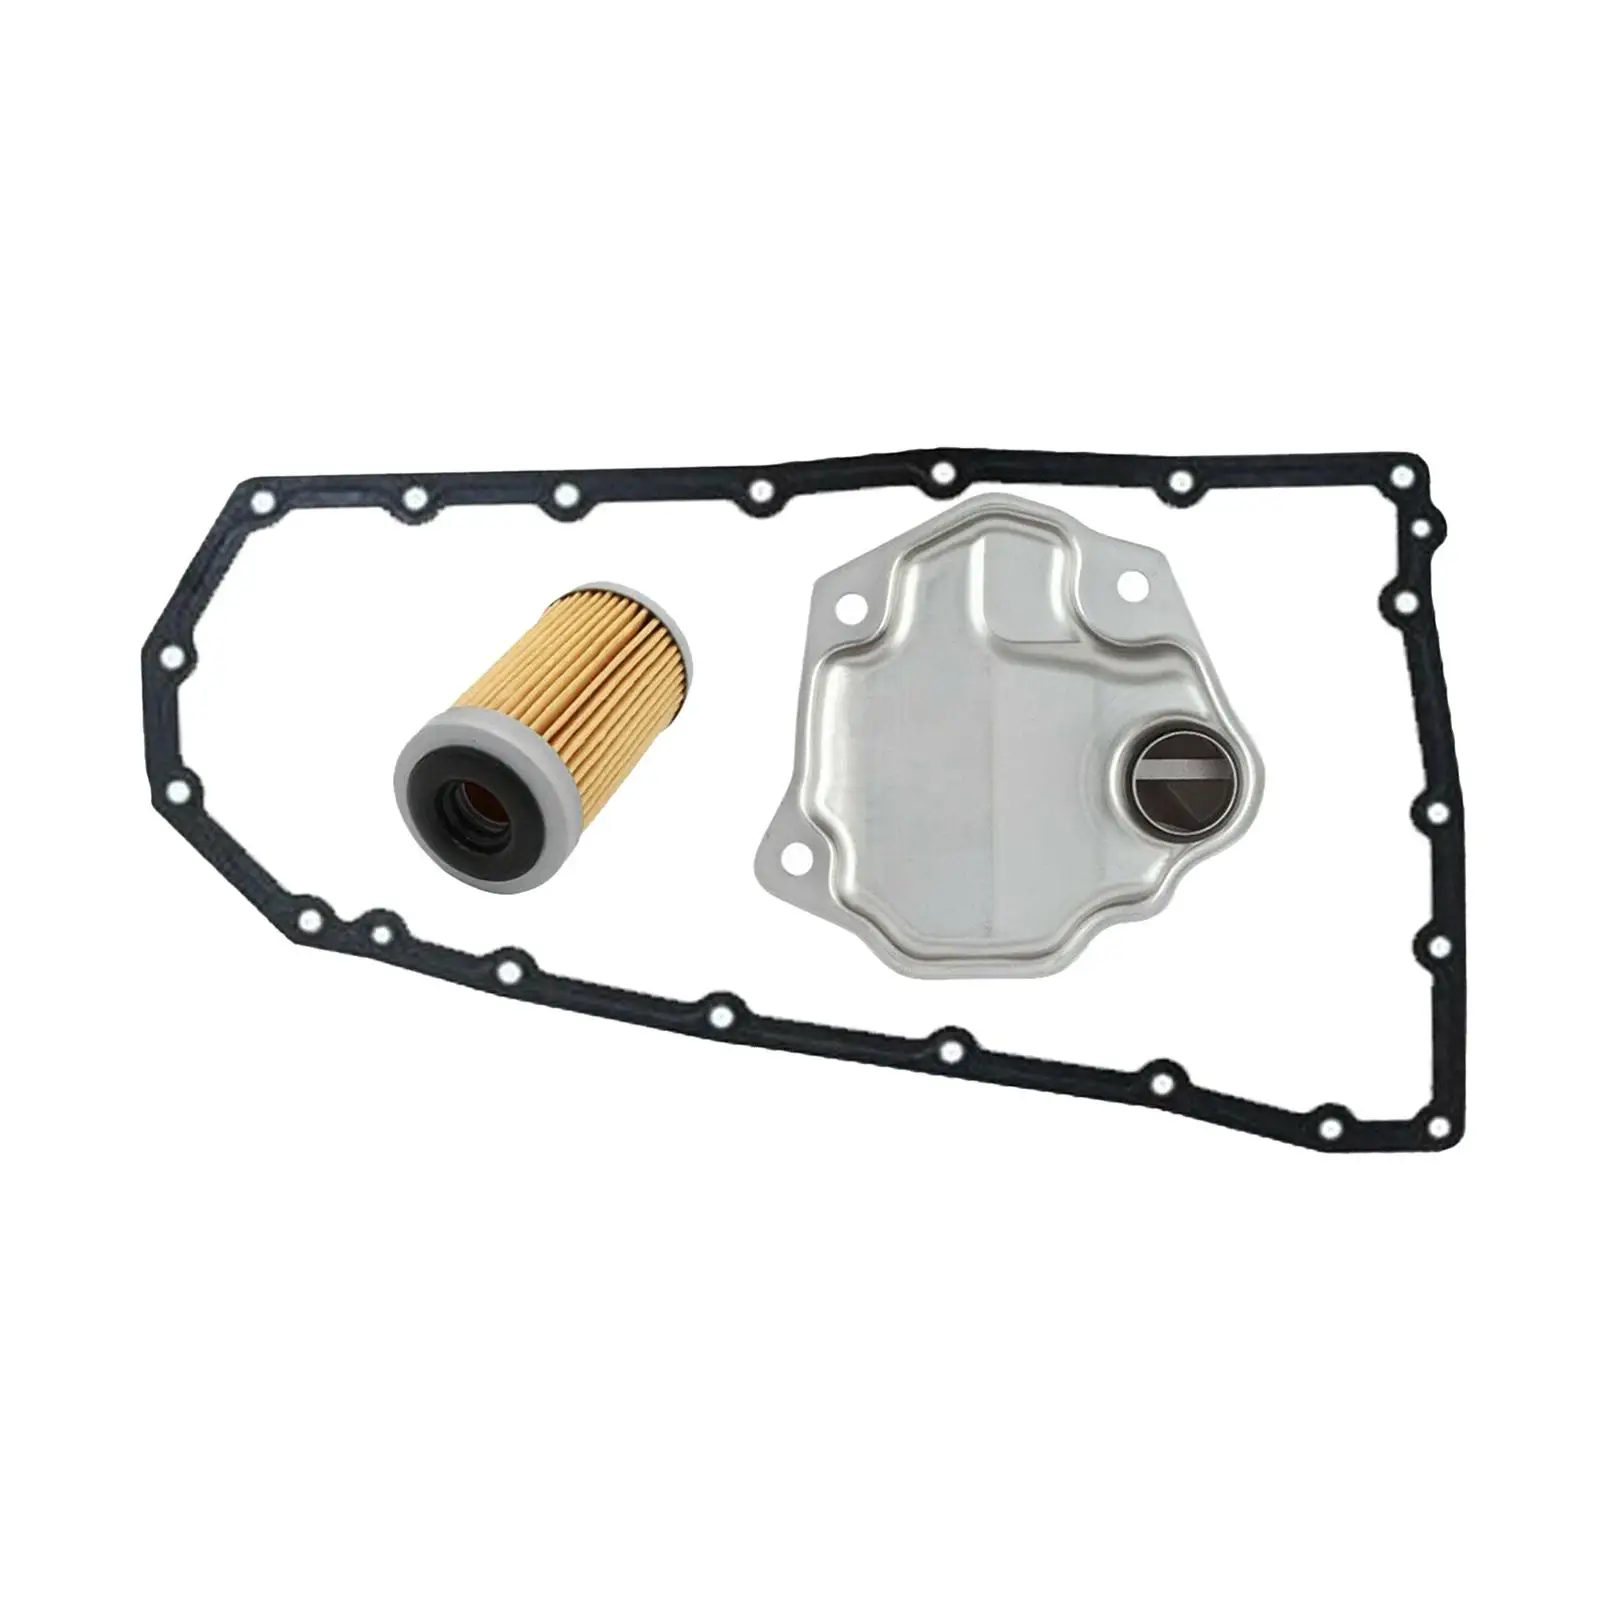 Car Transmission Filter Gasket Cooler Replacement 31728-29x0971XF0D 317263JX097-1XF0